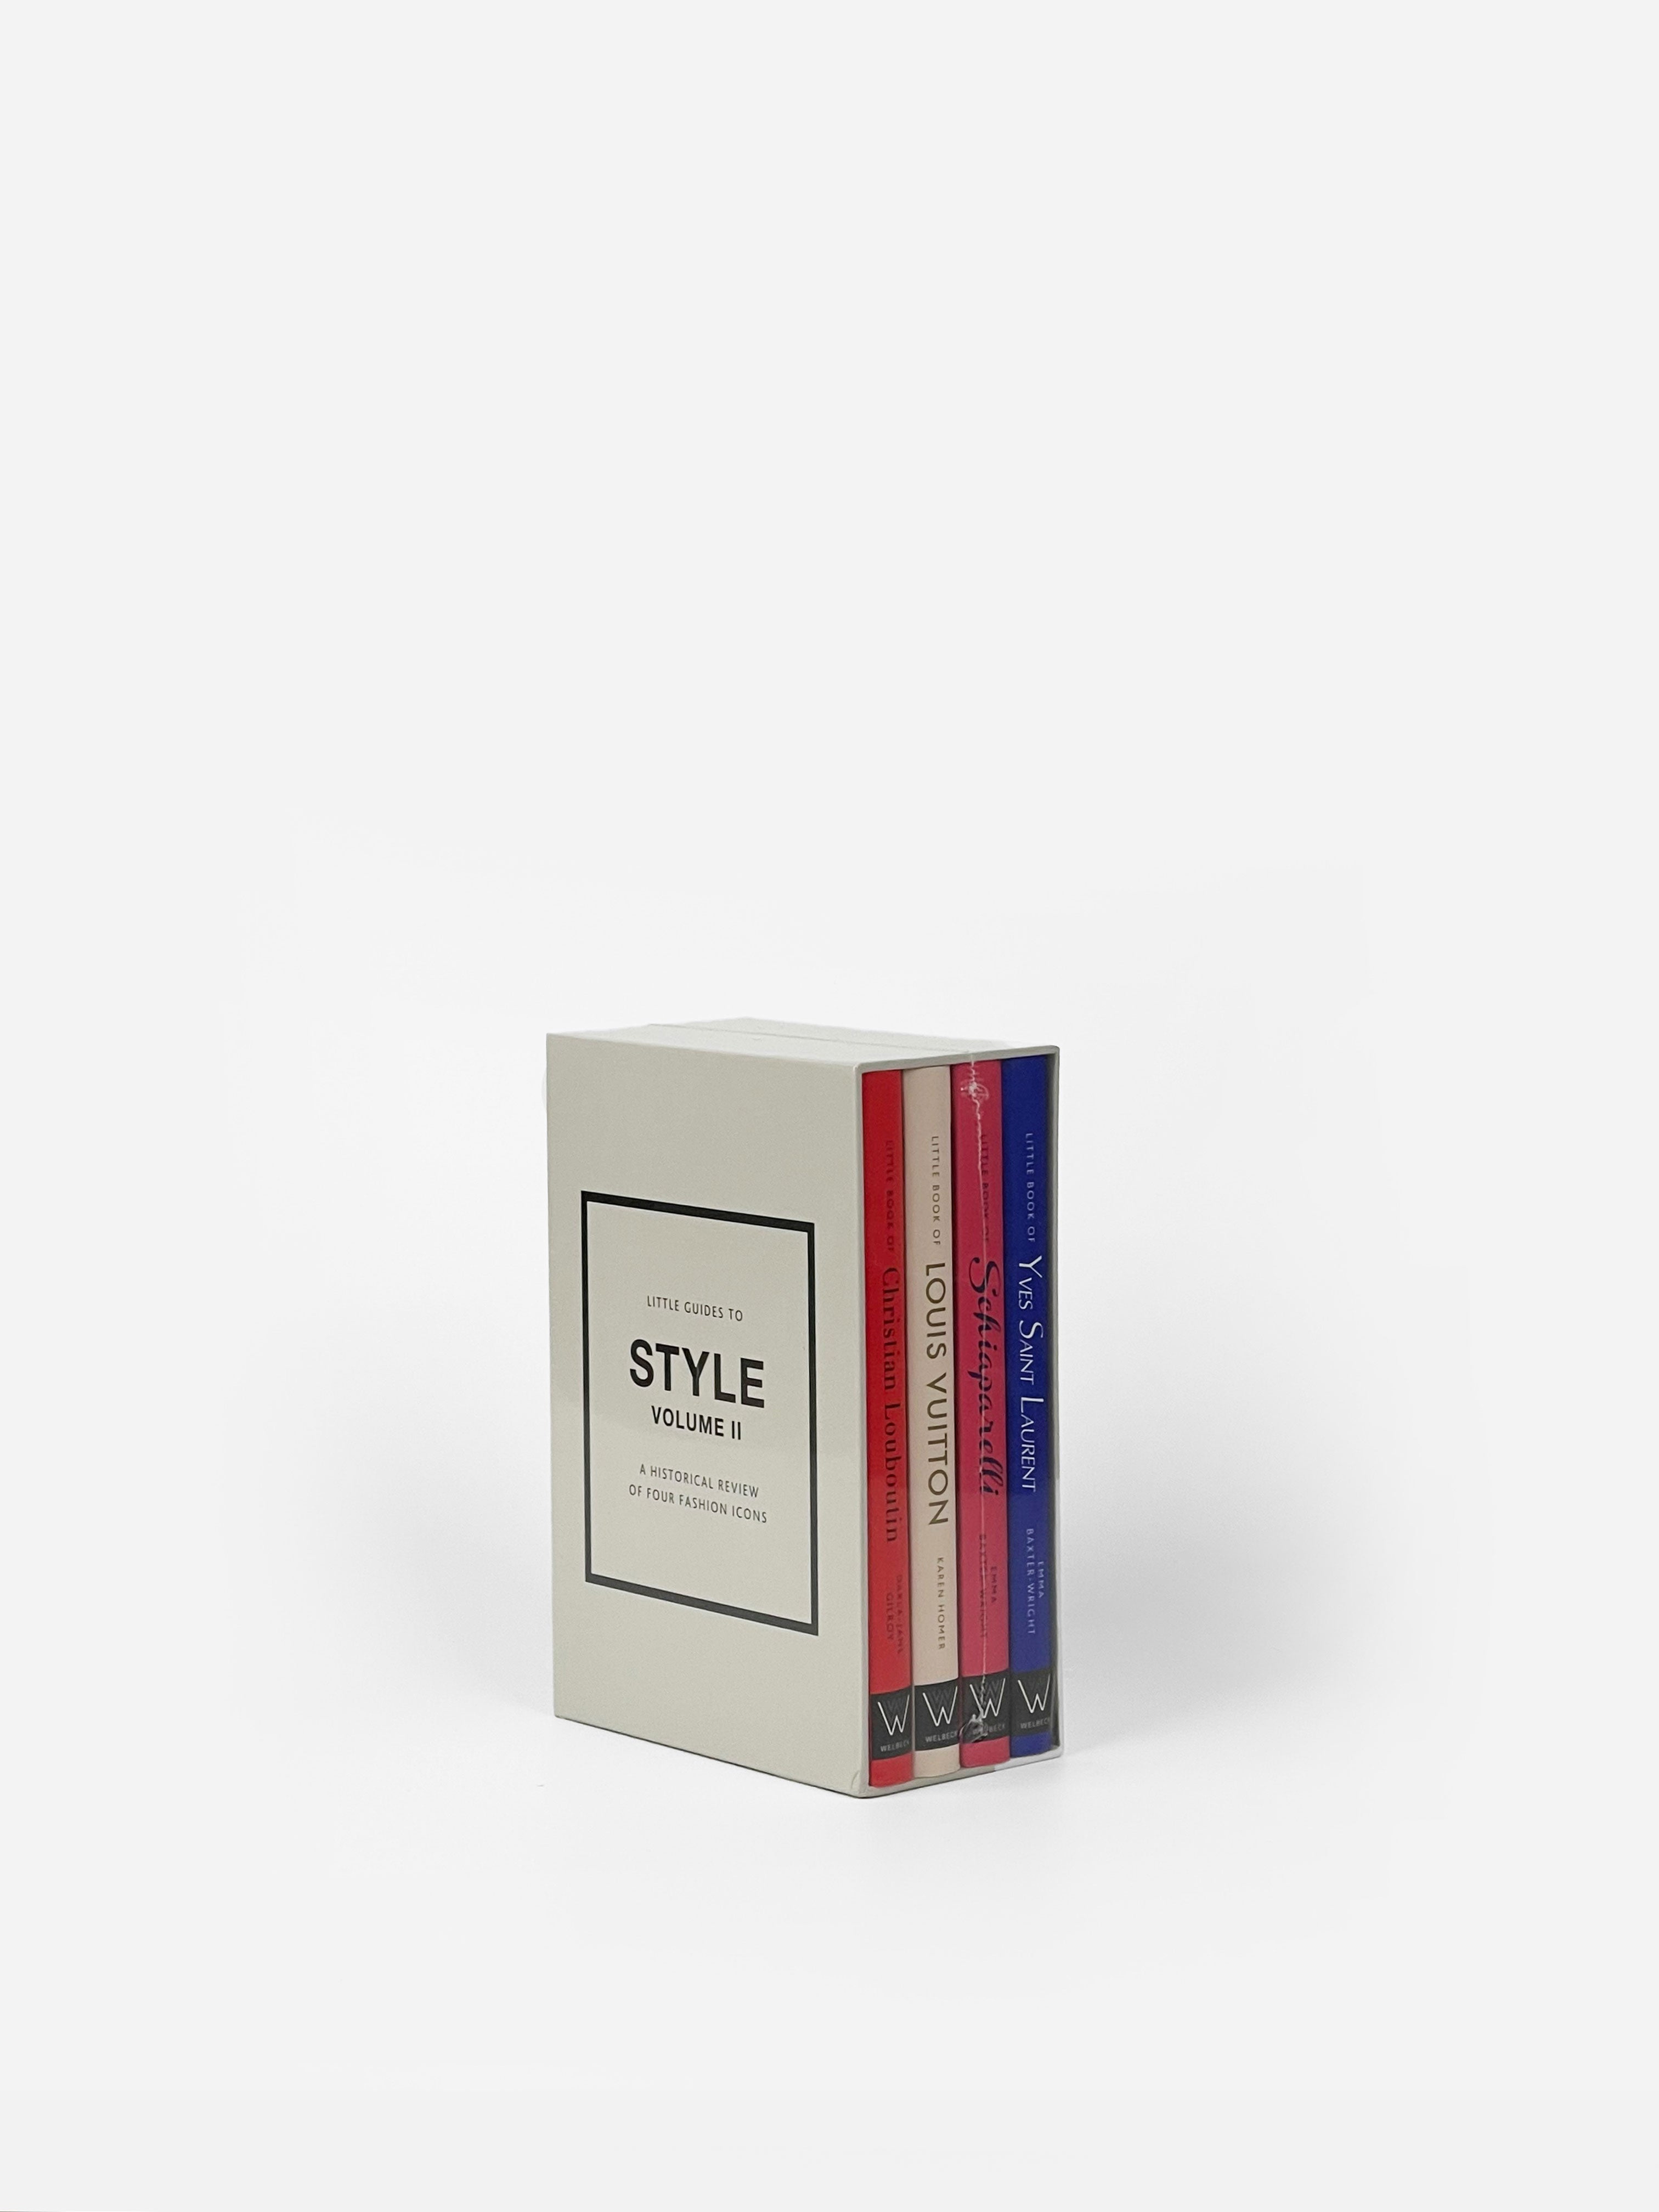 Book Little Guides to Style Volume II: A Historical View of Four